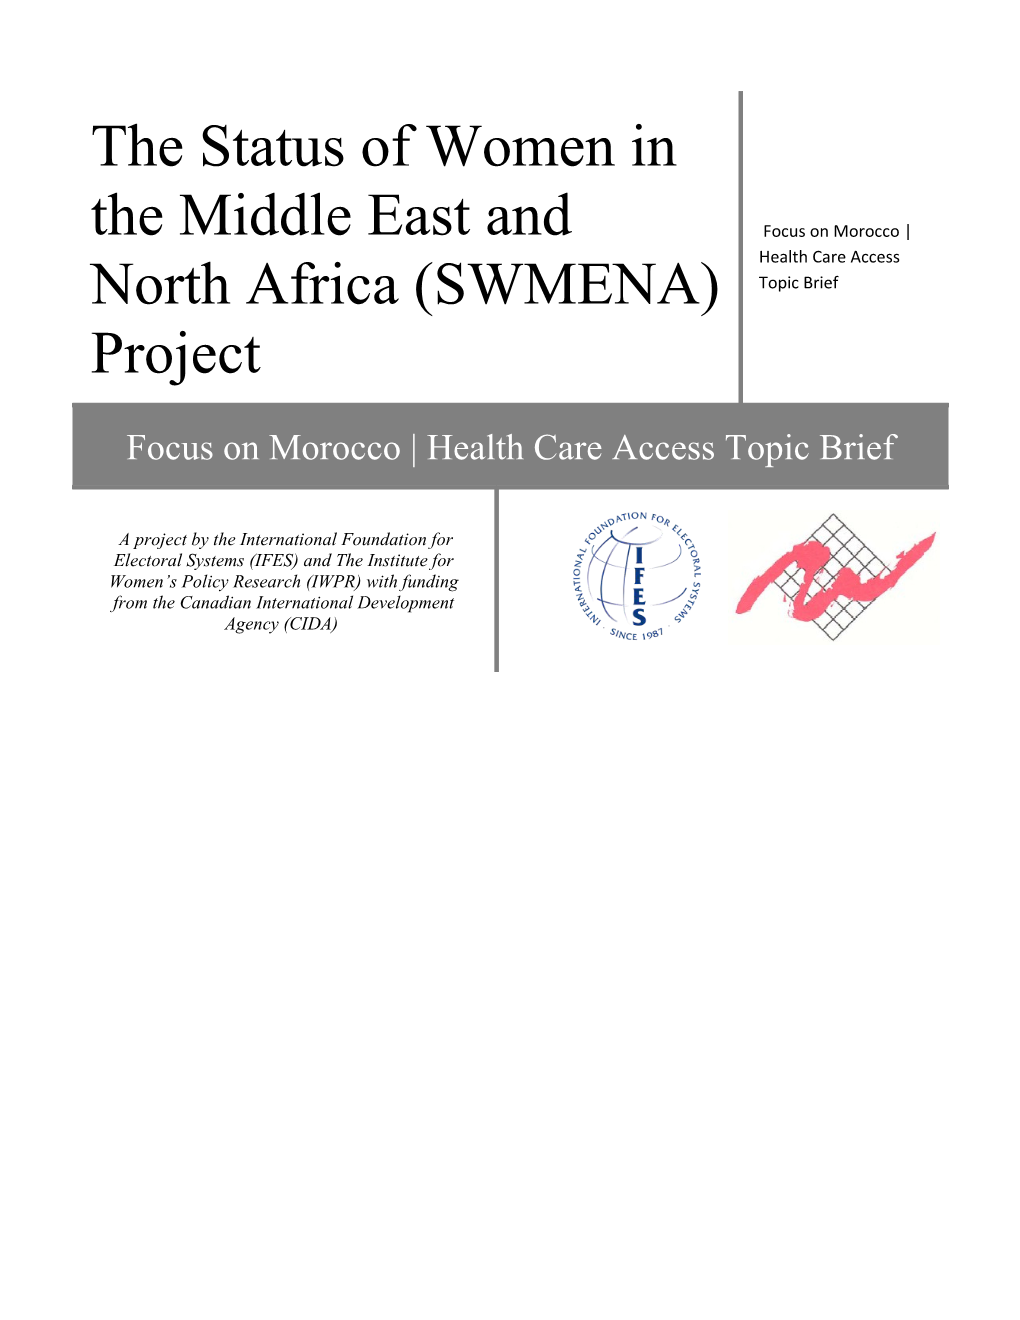 The Status of Women in the Middle East and North Africa (SWMENA) Project